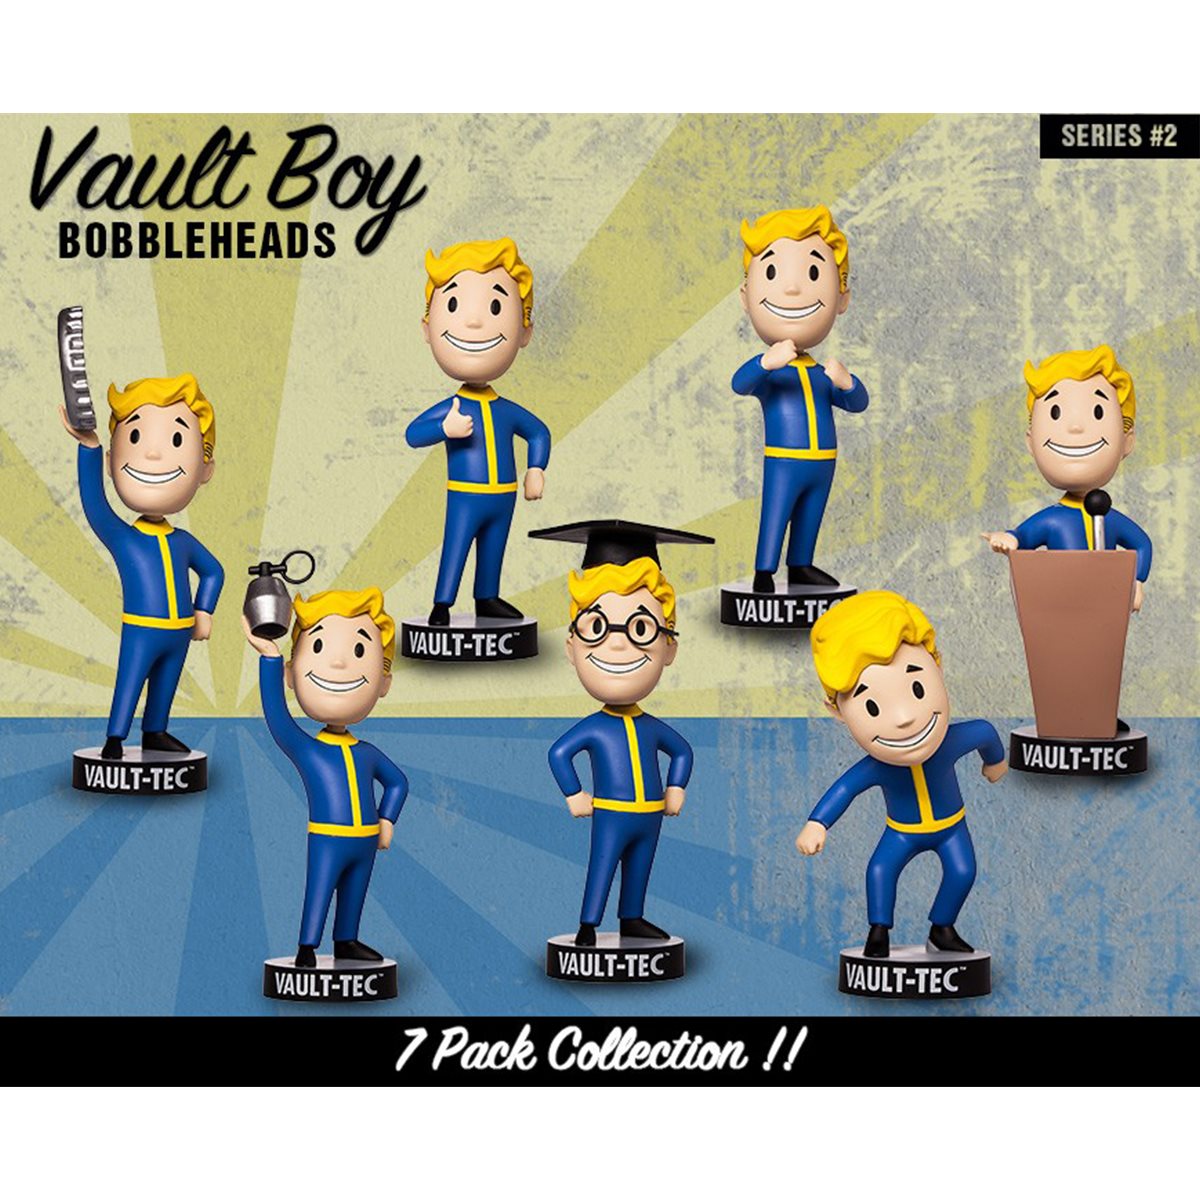 The bobbleheads in fallout 4 фото 83